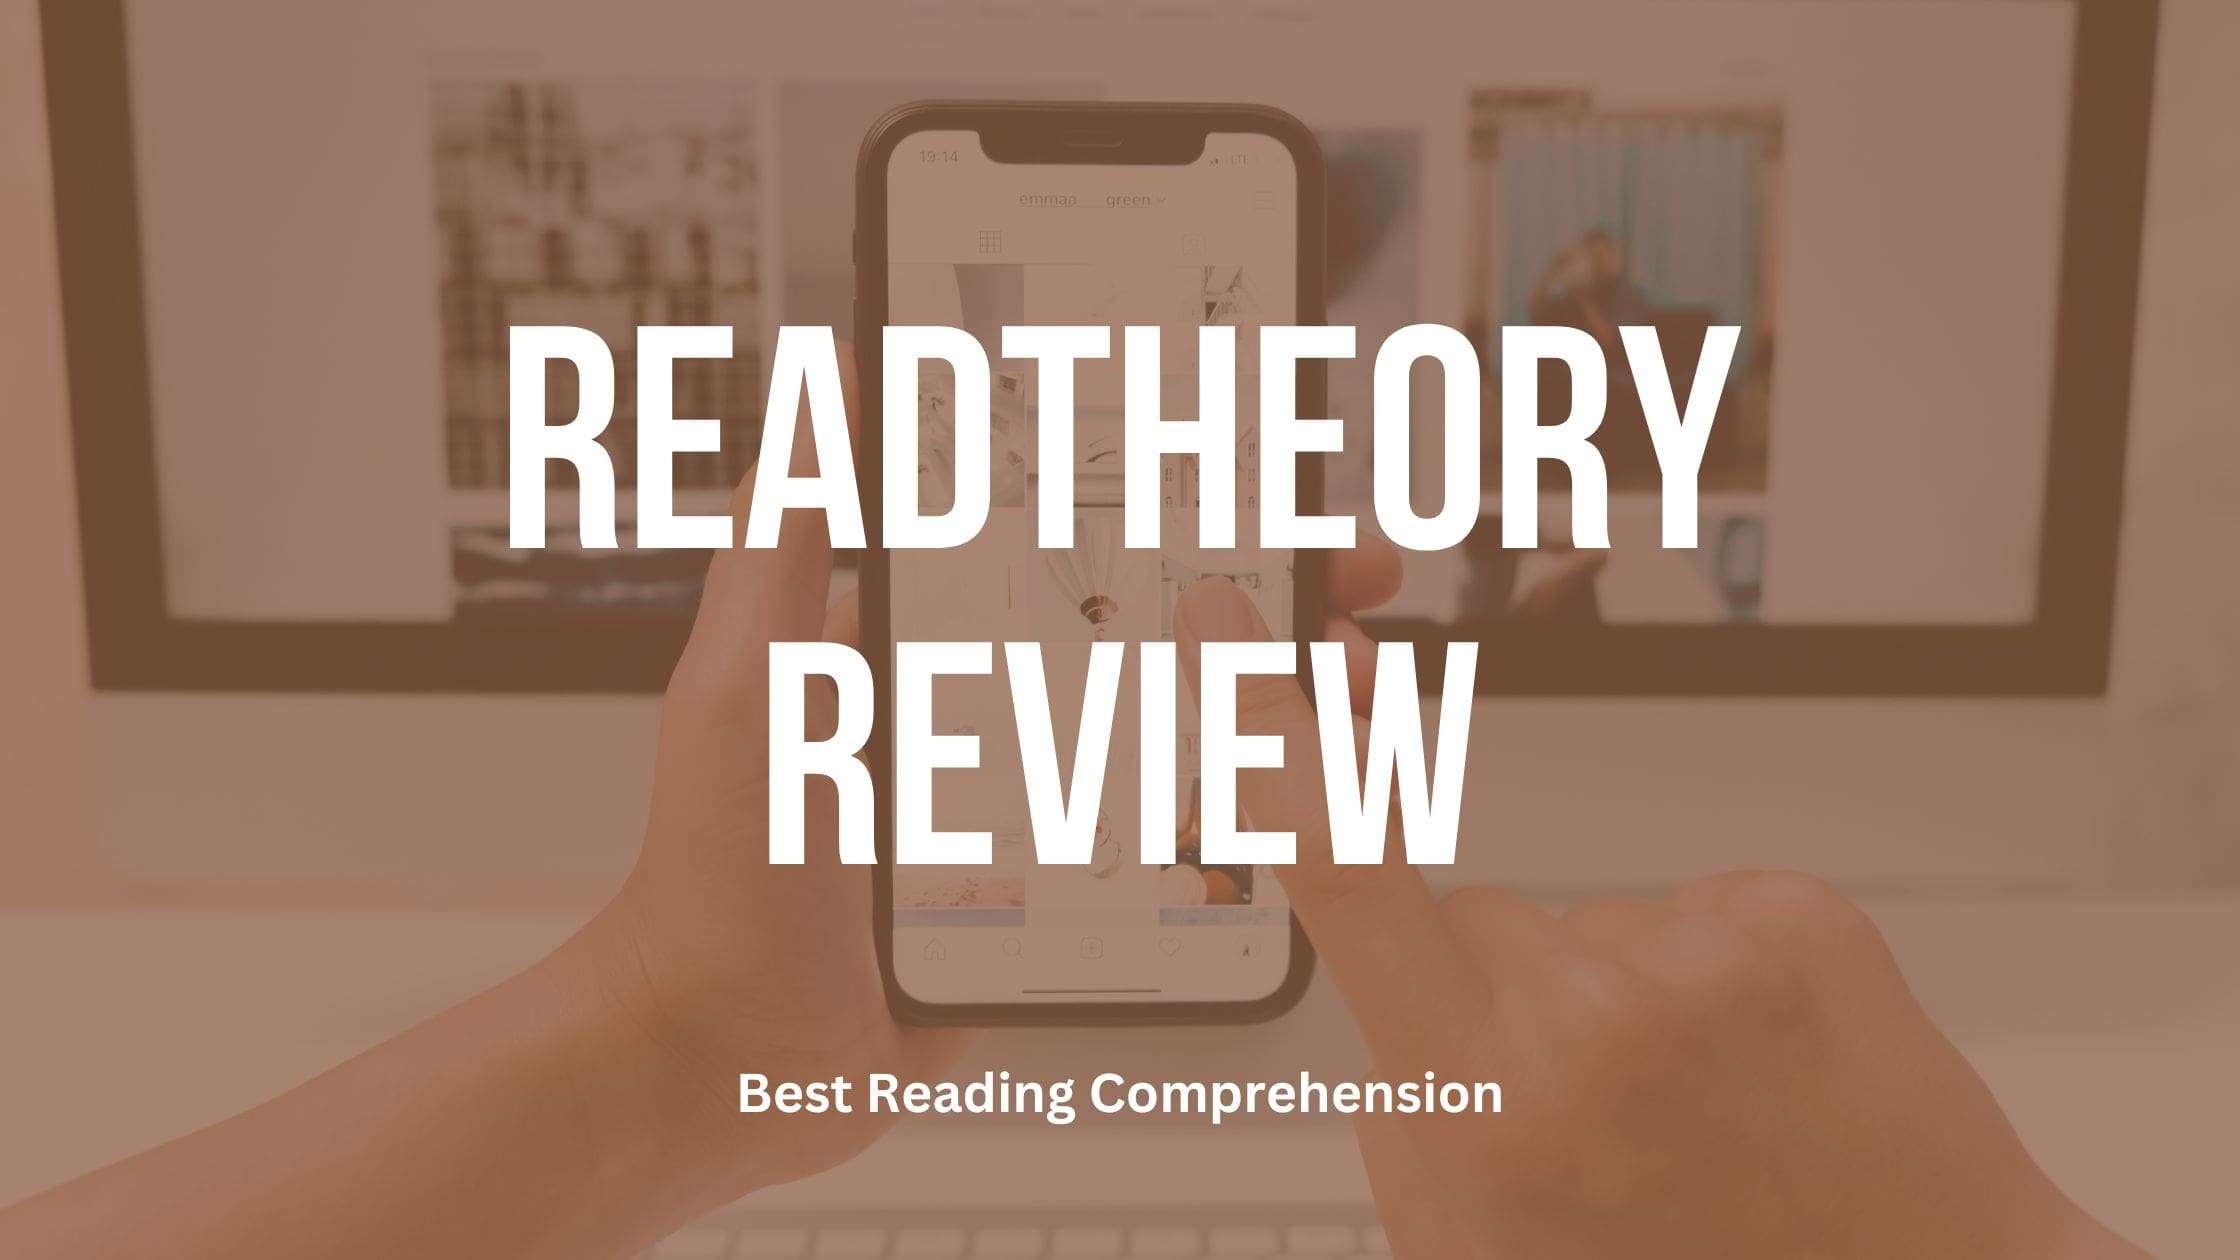 ReadTheory Review: Best Reading Comprehension